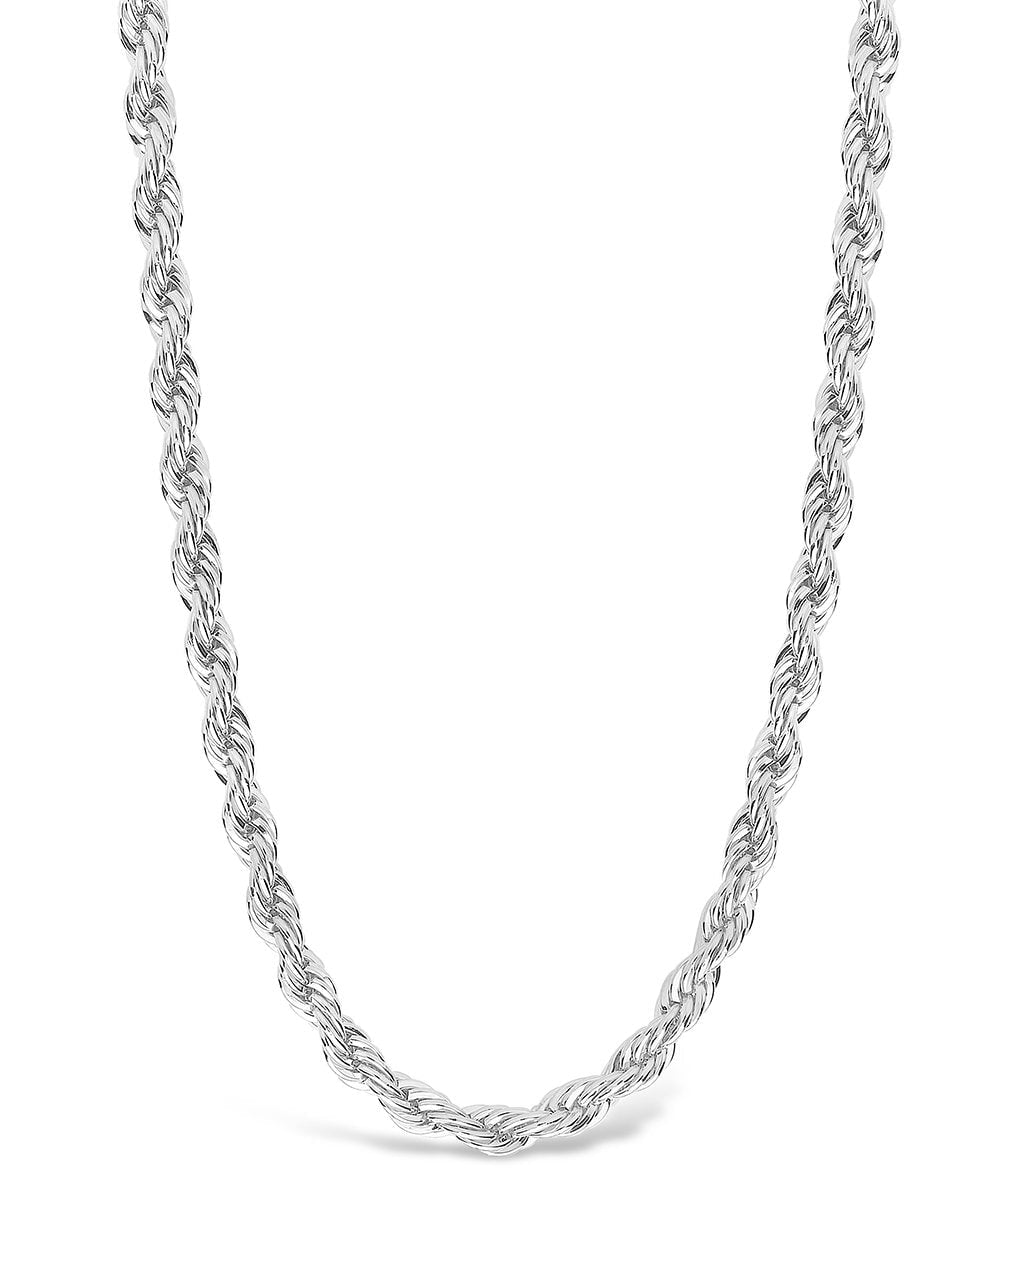 Men's Rope Twist Chain Necklace Necklace Sterling Forever Silver 